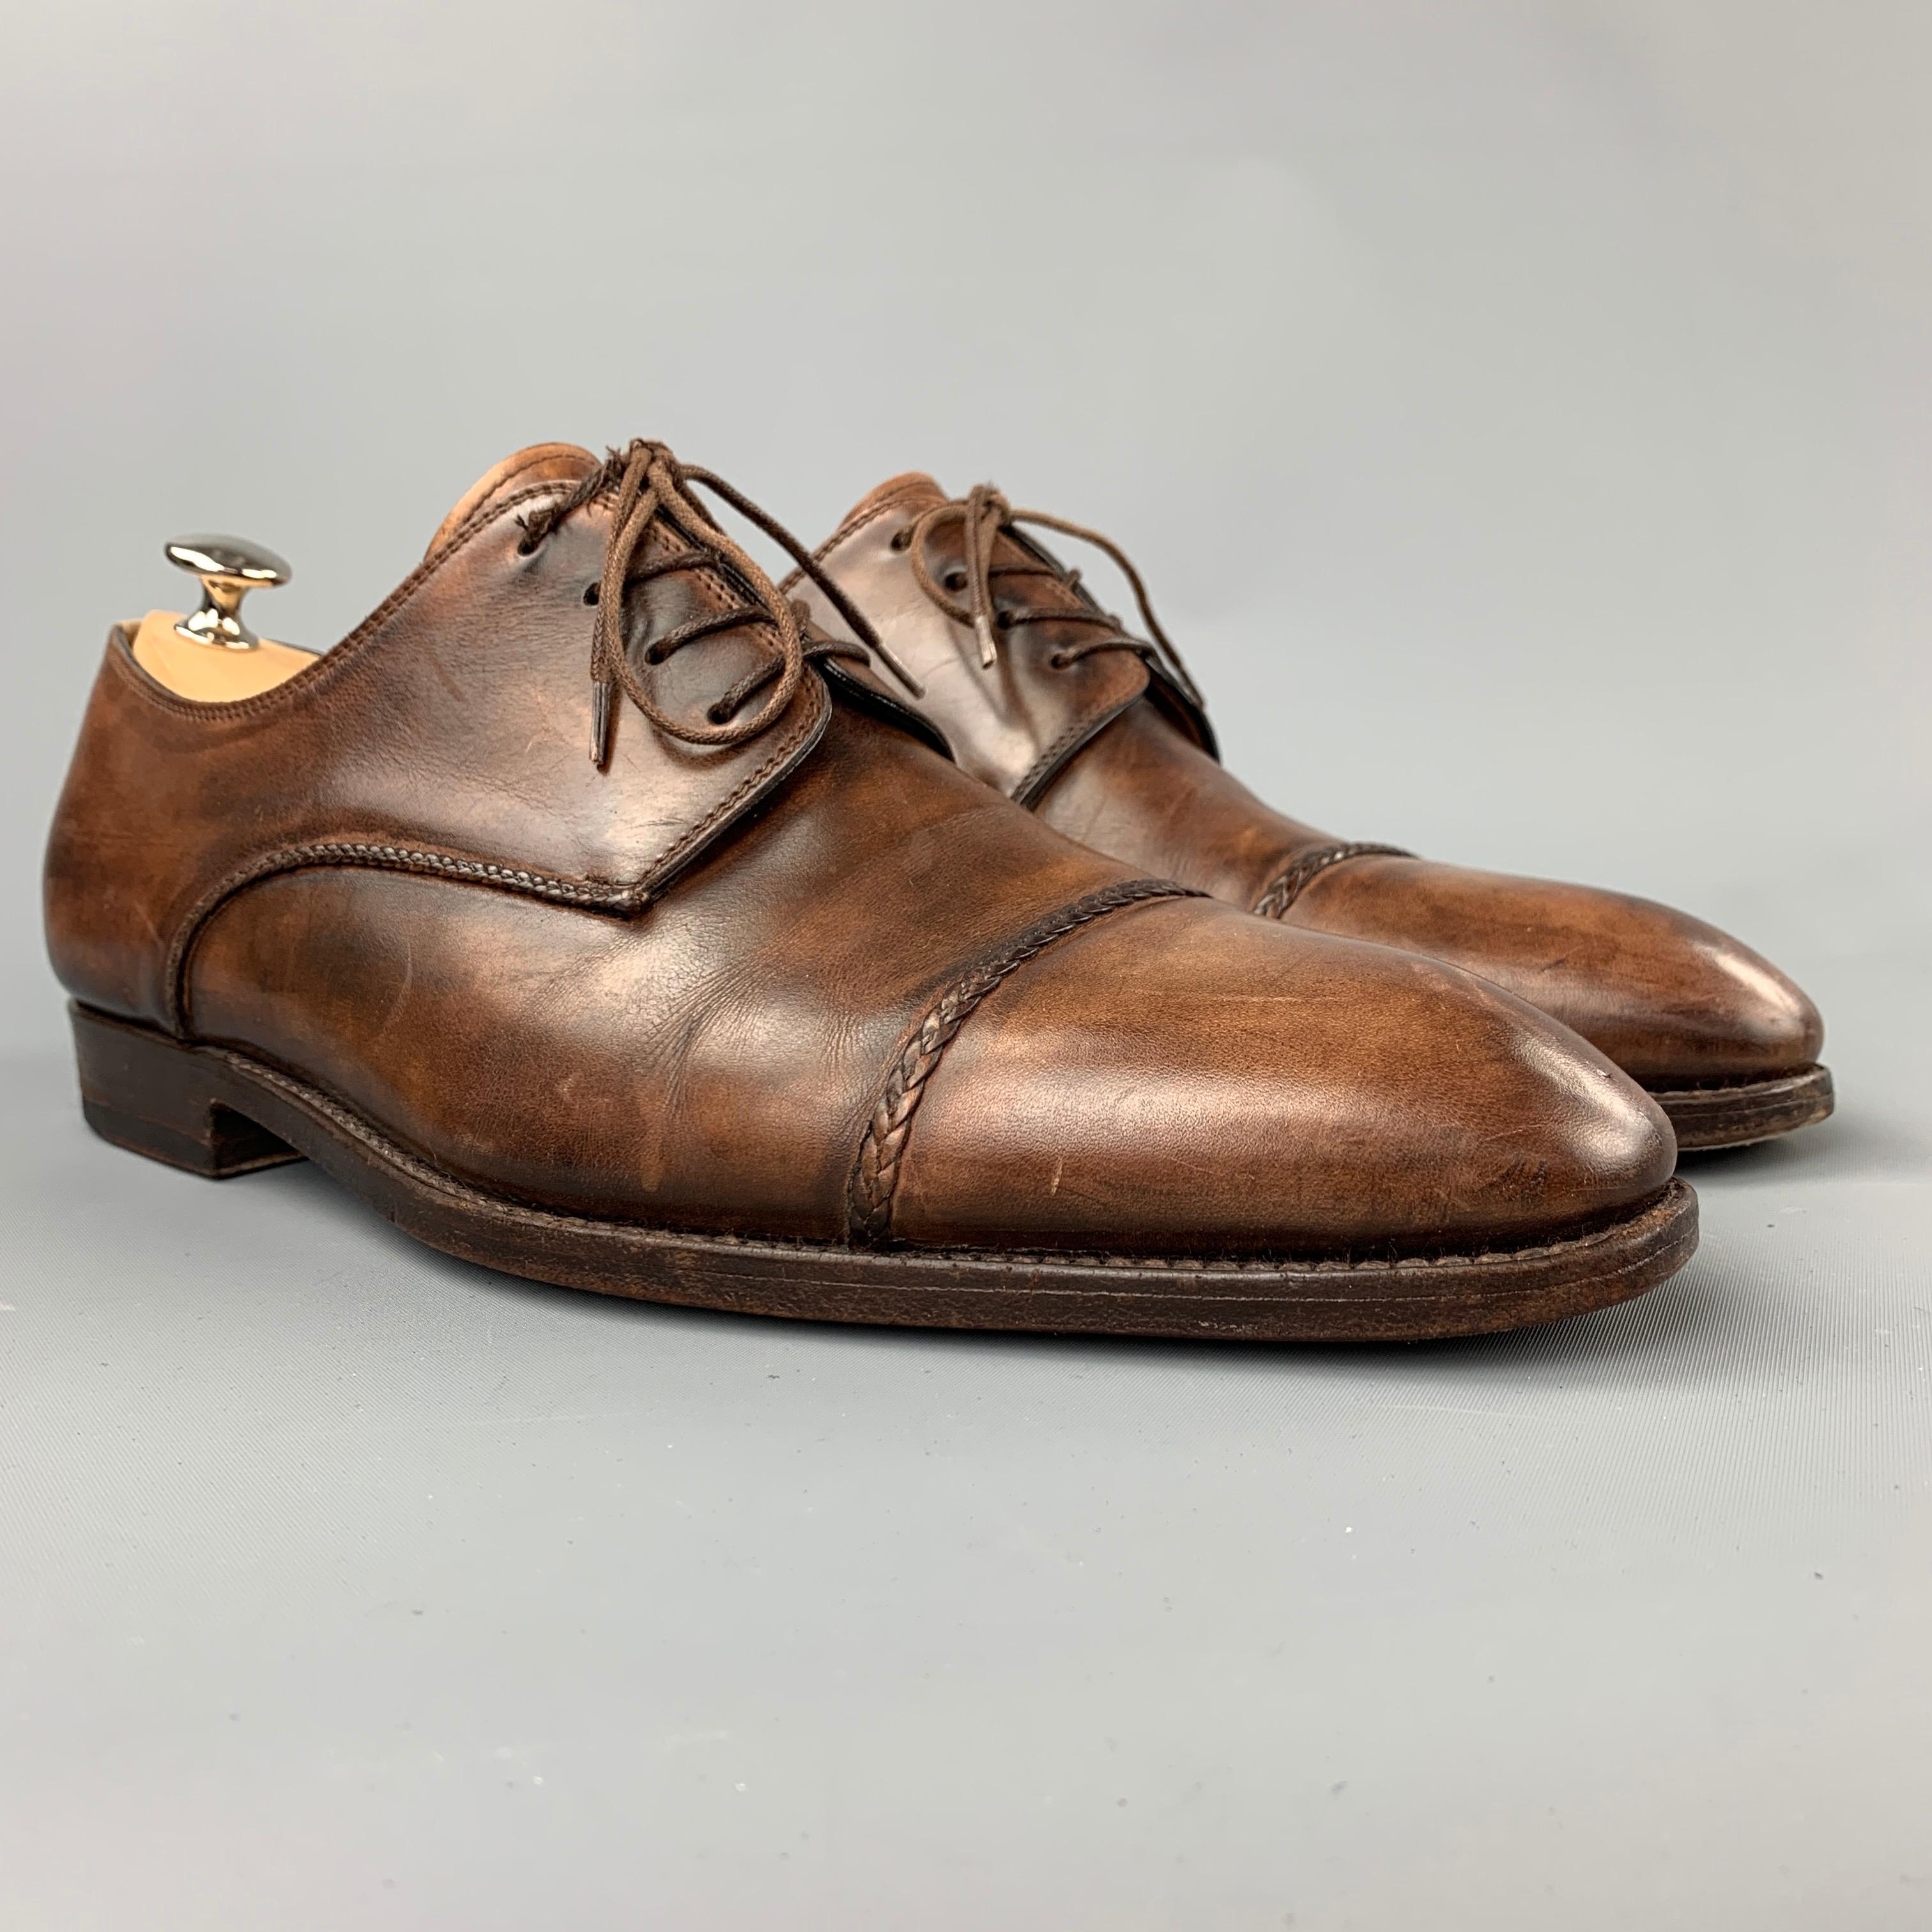 BONTONI dress shoes comes in a brown burnished leather featuring a cap toe, wooden sole, and a lace up closure. Made in Italy.

Very Good Pre-Owned Condition.
Marked: 9/10

Outsole: 12 in. x 4 in. 